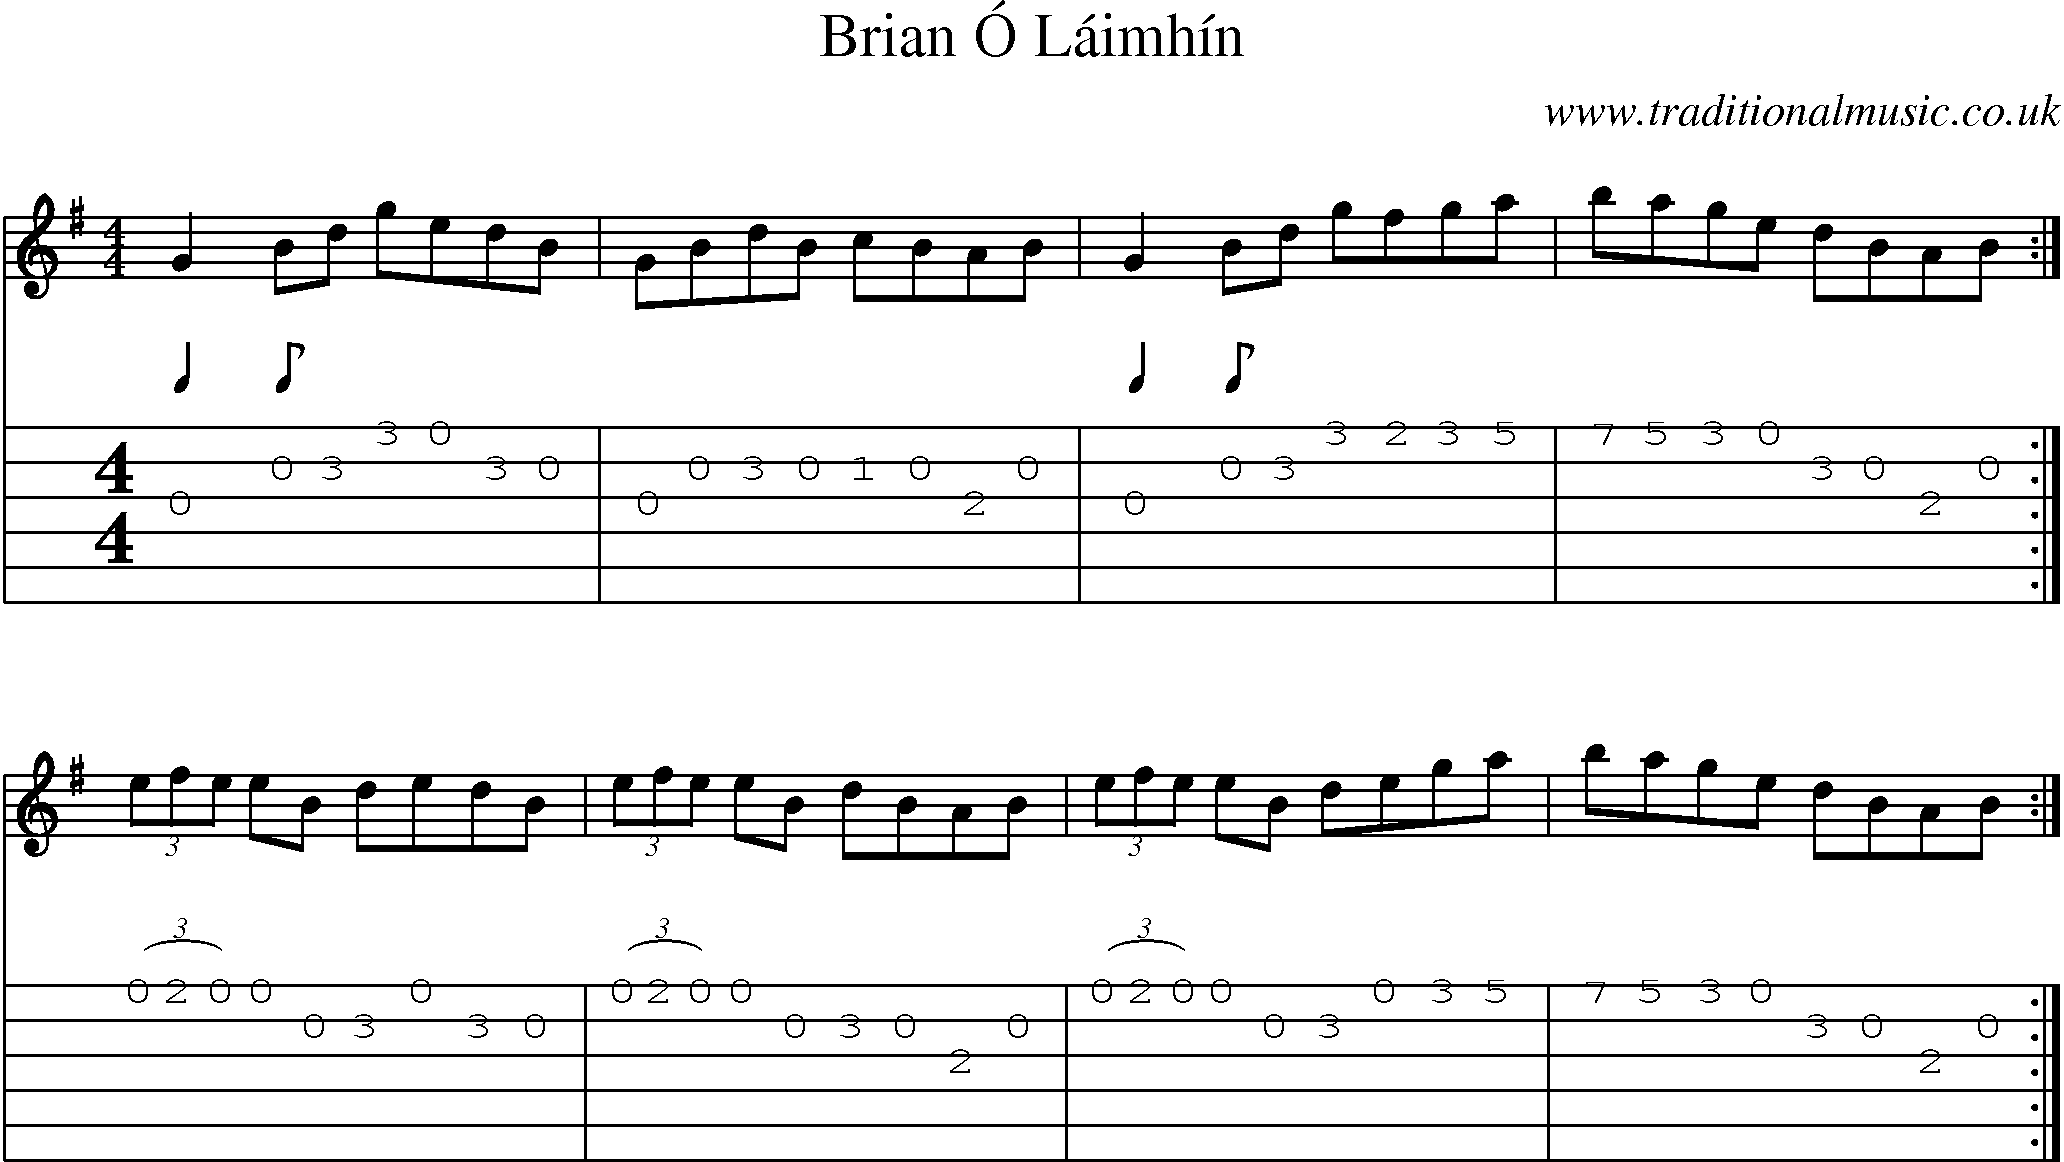 Music Score and Guitar Tabs for Brian O Laimhin